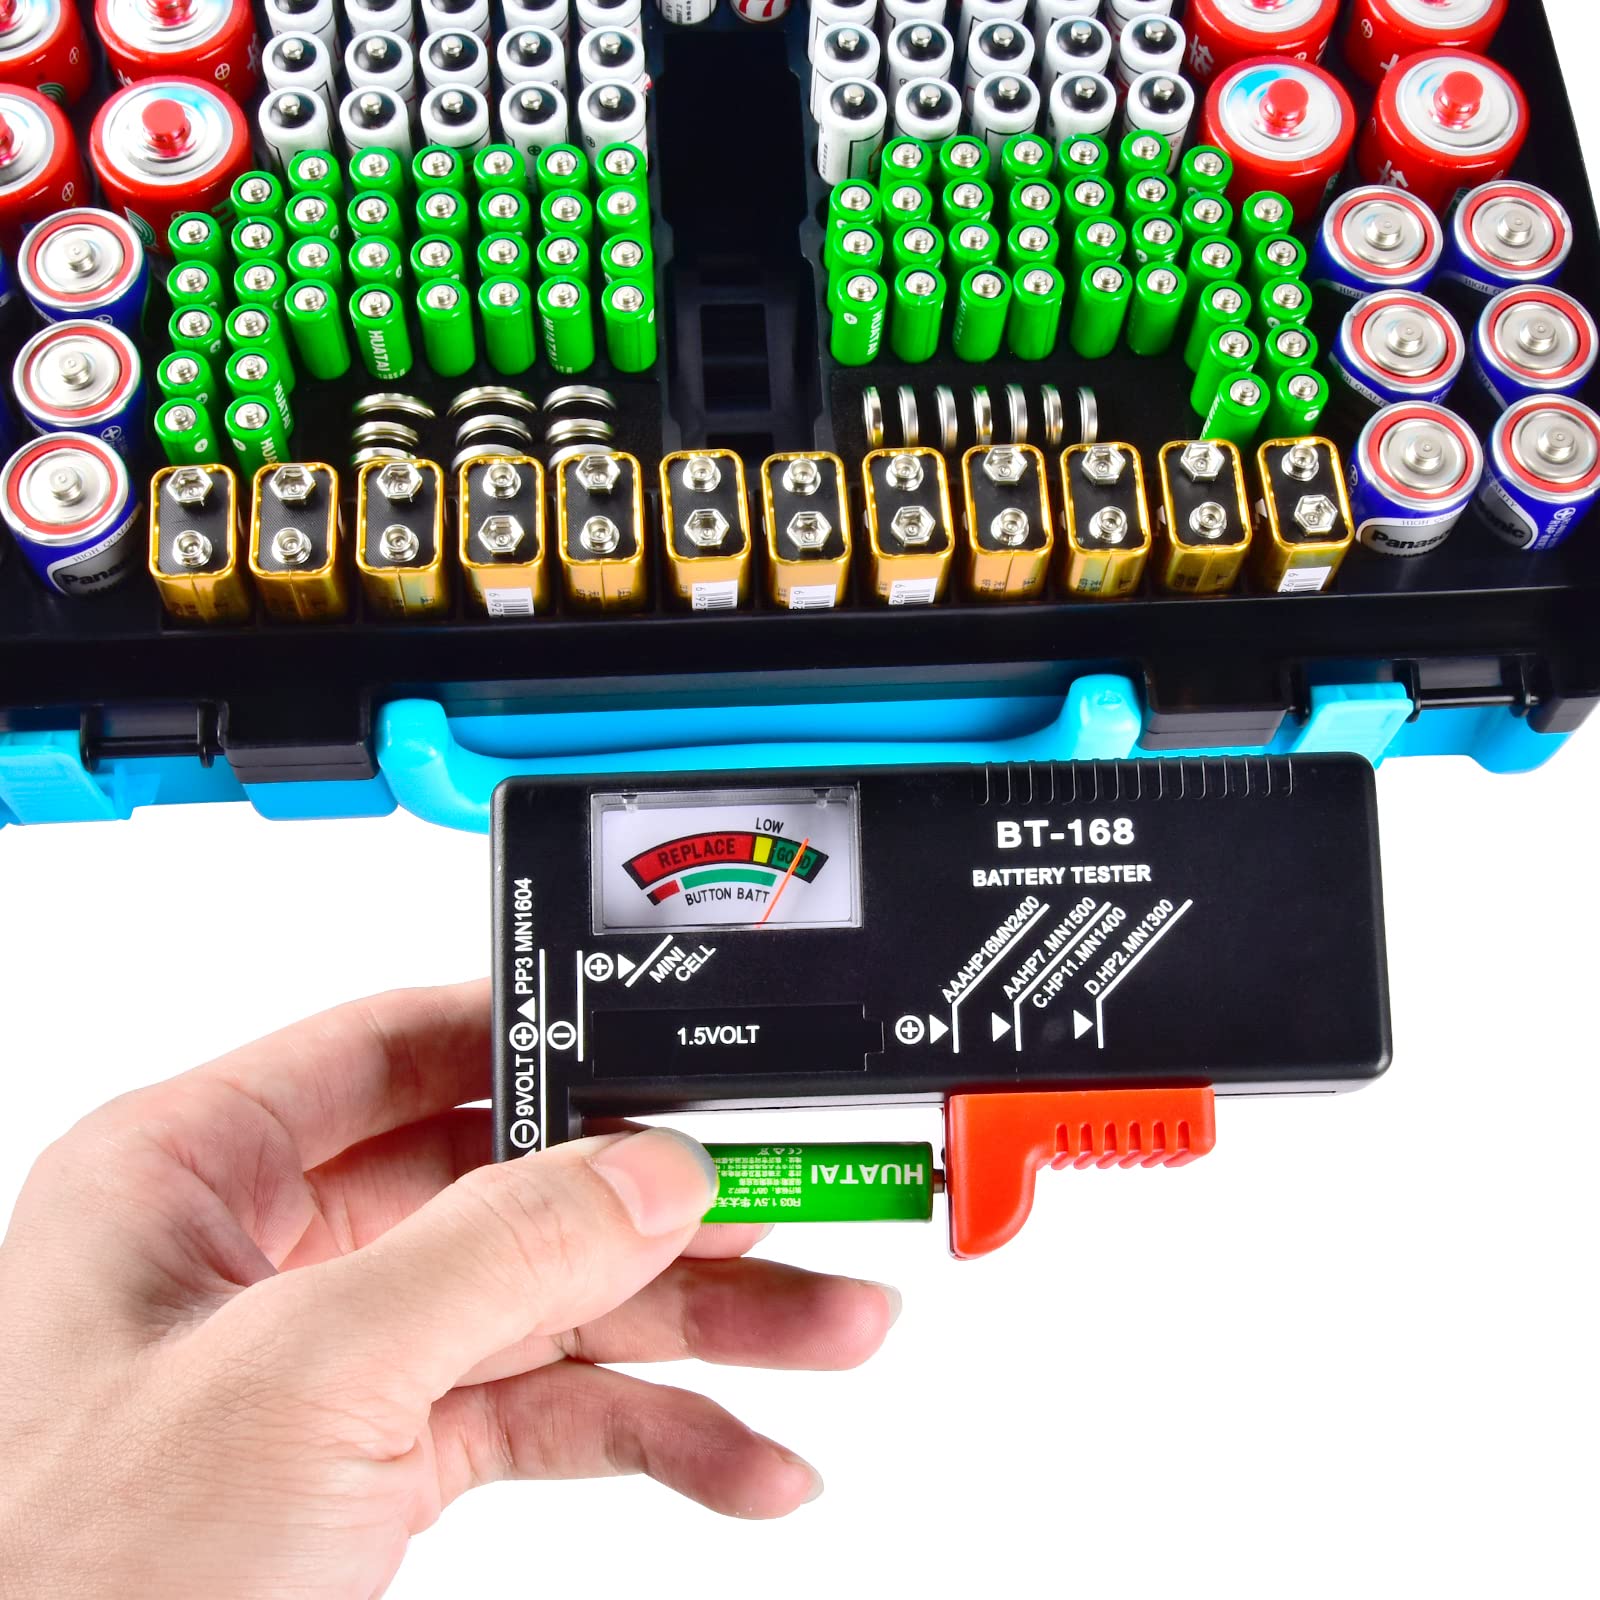 The Battery Organizer, Battery Organizer Storage Case with Tester